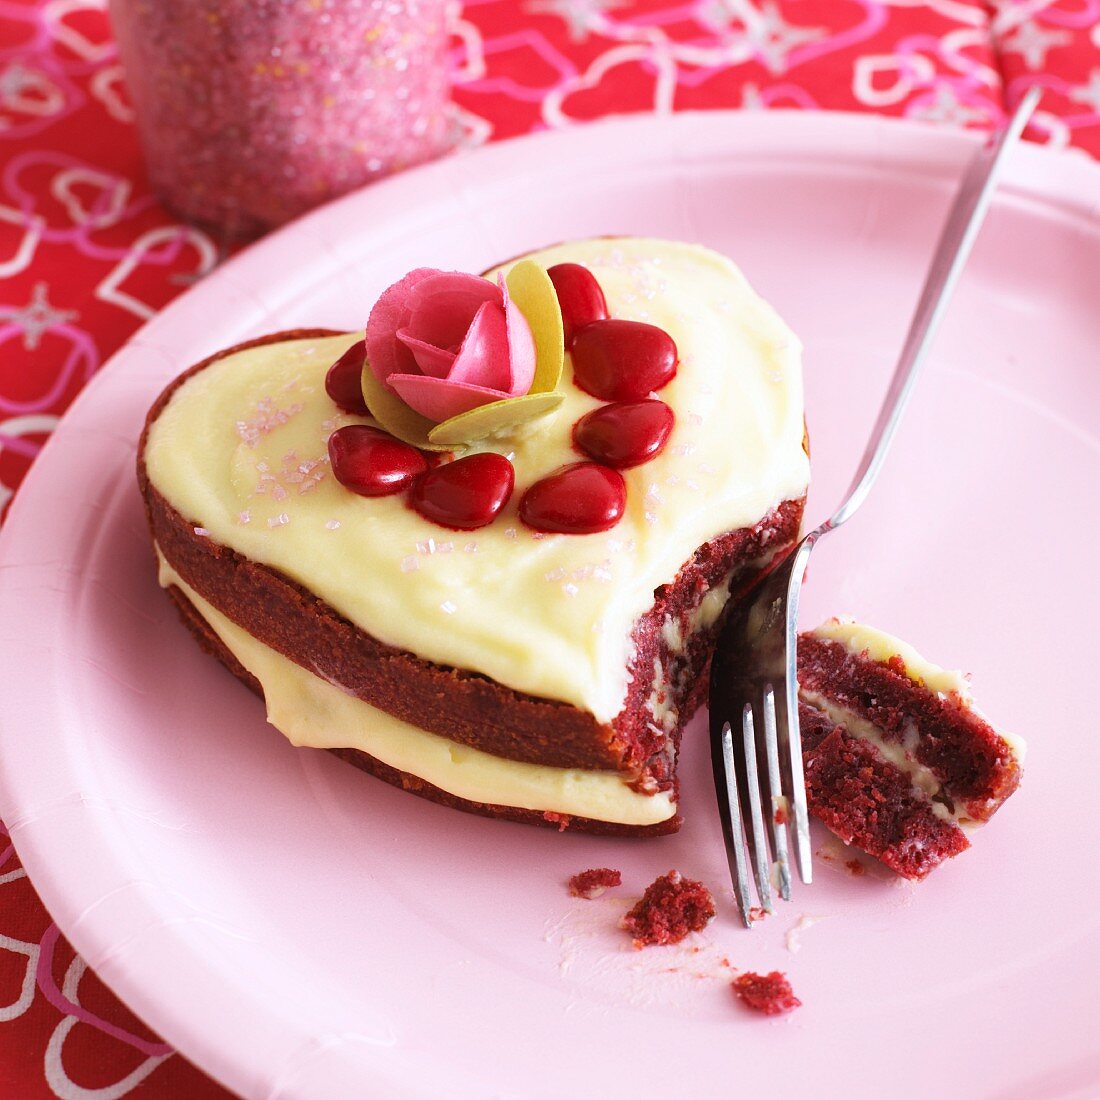 A heart-shaped cake for Valentine's Day